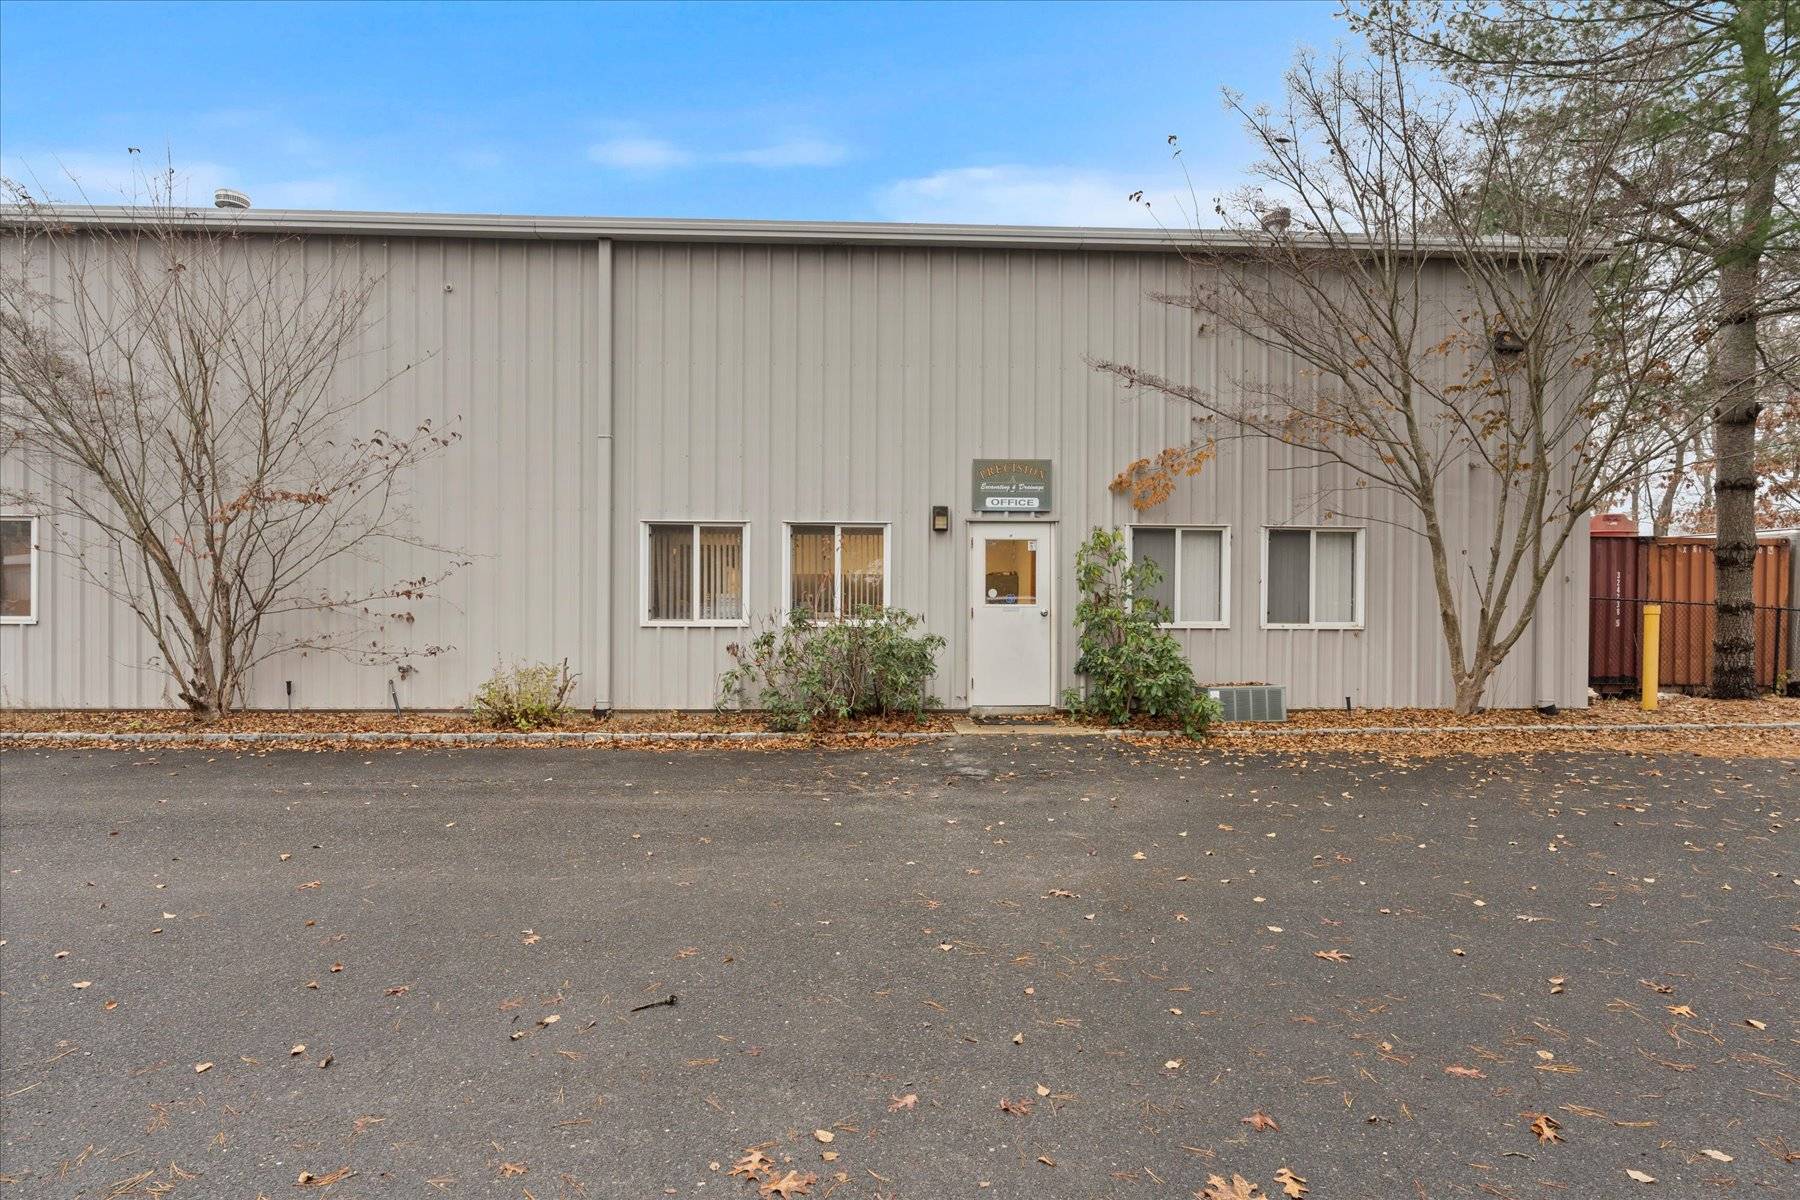 Light Industrial Space For Lease In Quogue